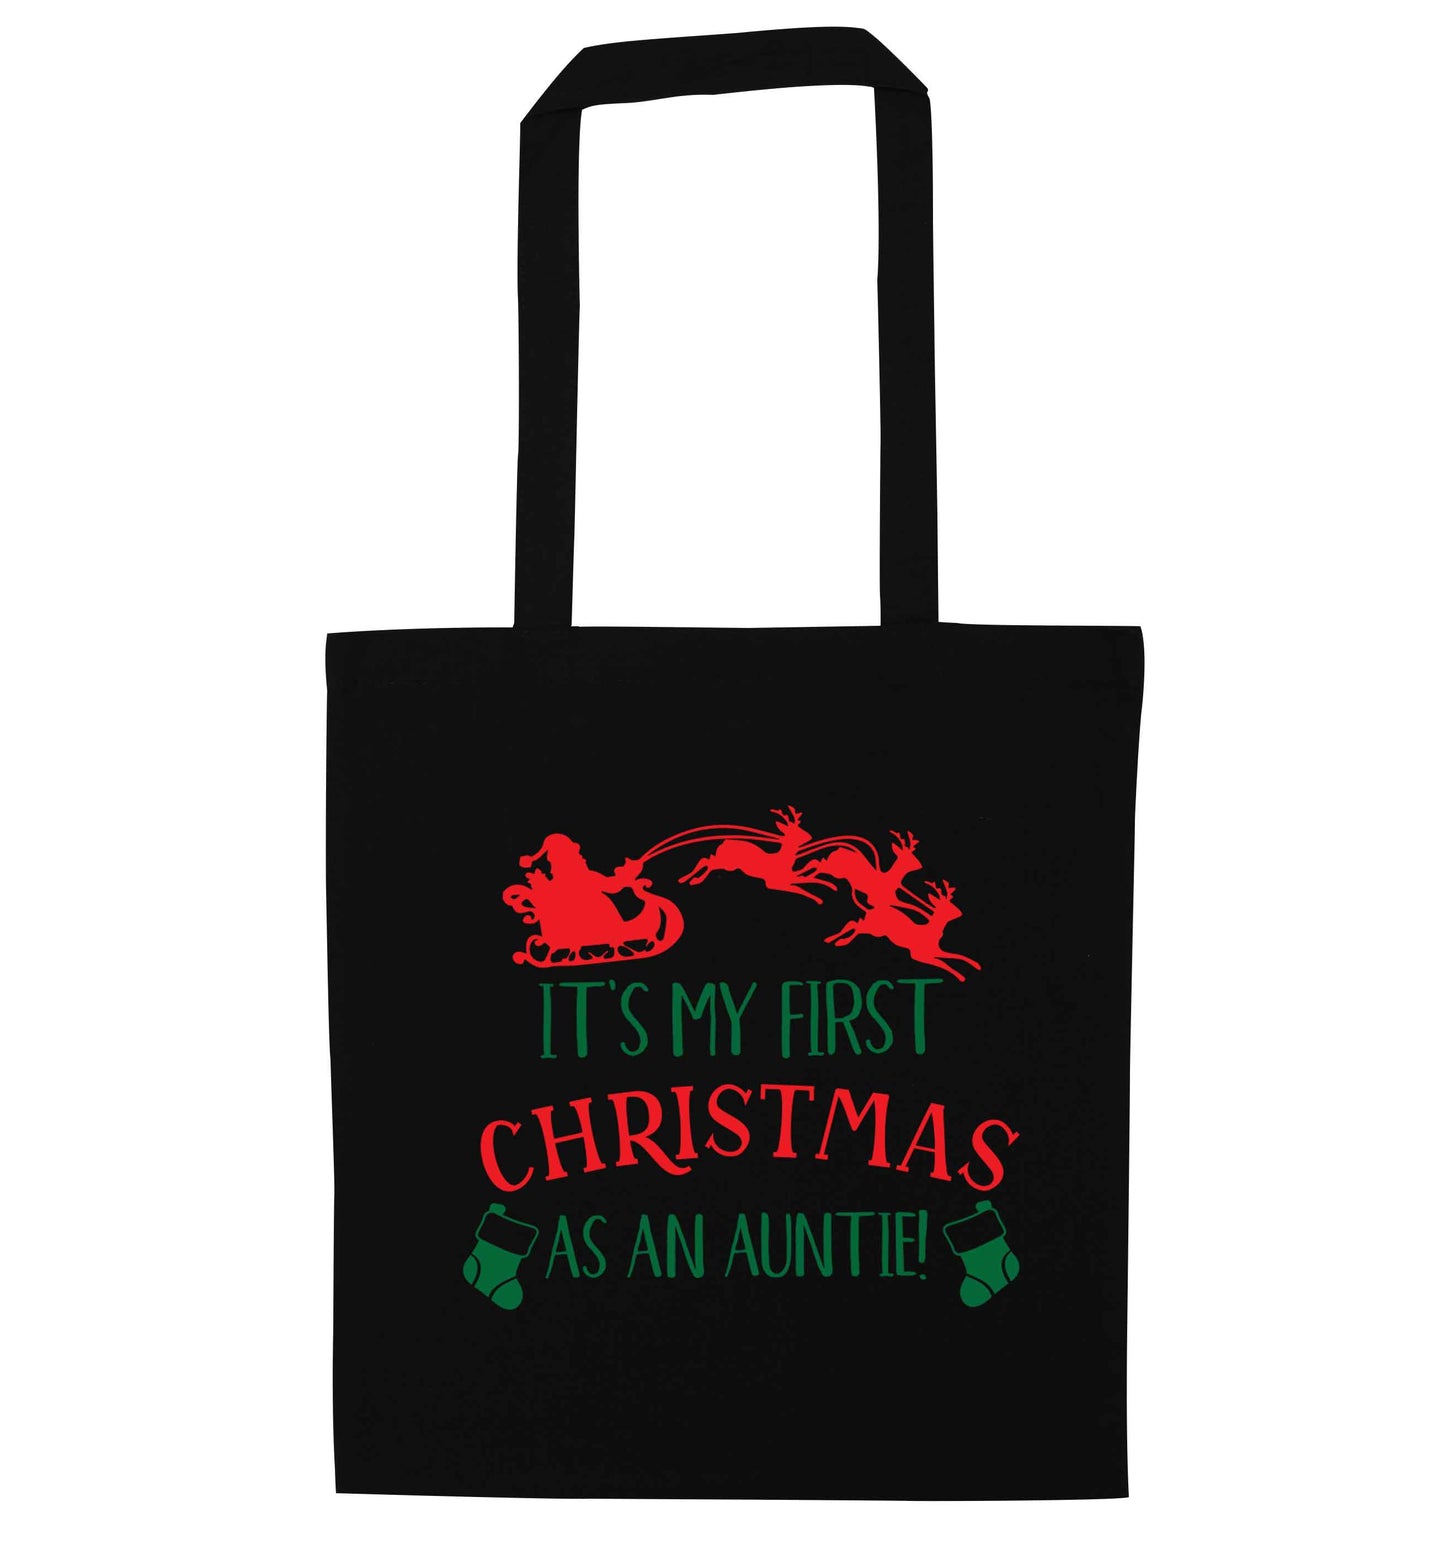 It's my first Christmas as an auntie! black tote bag